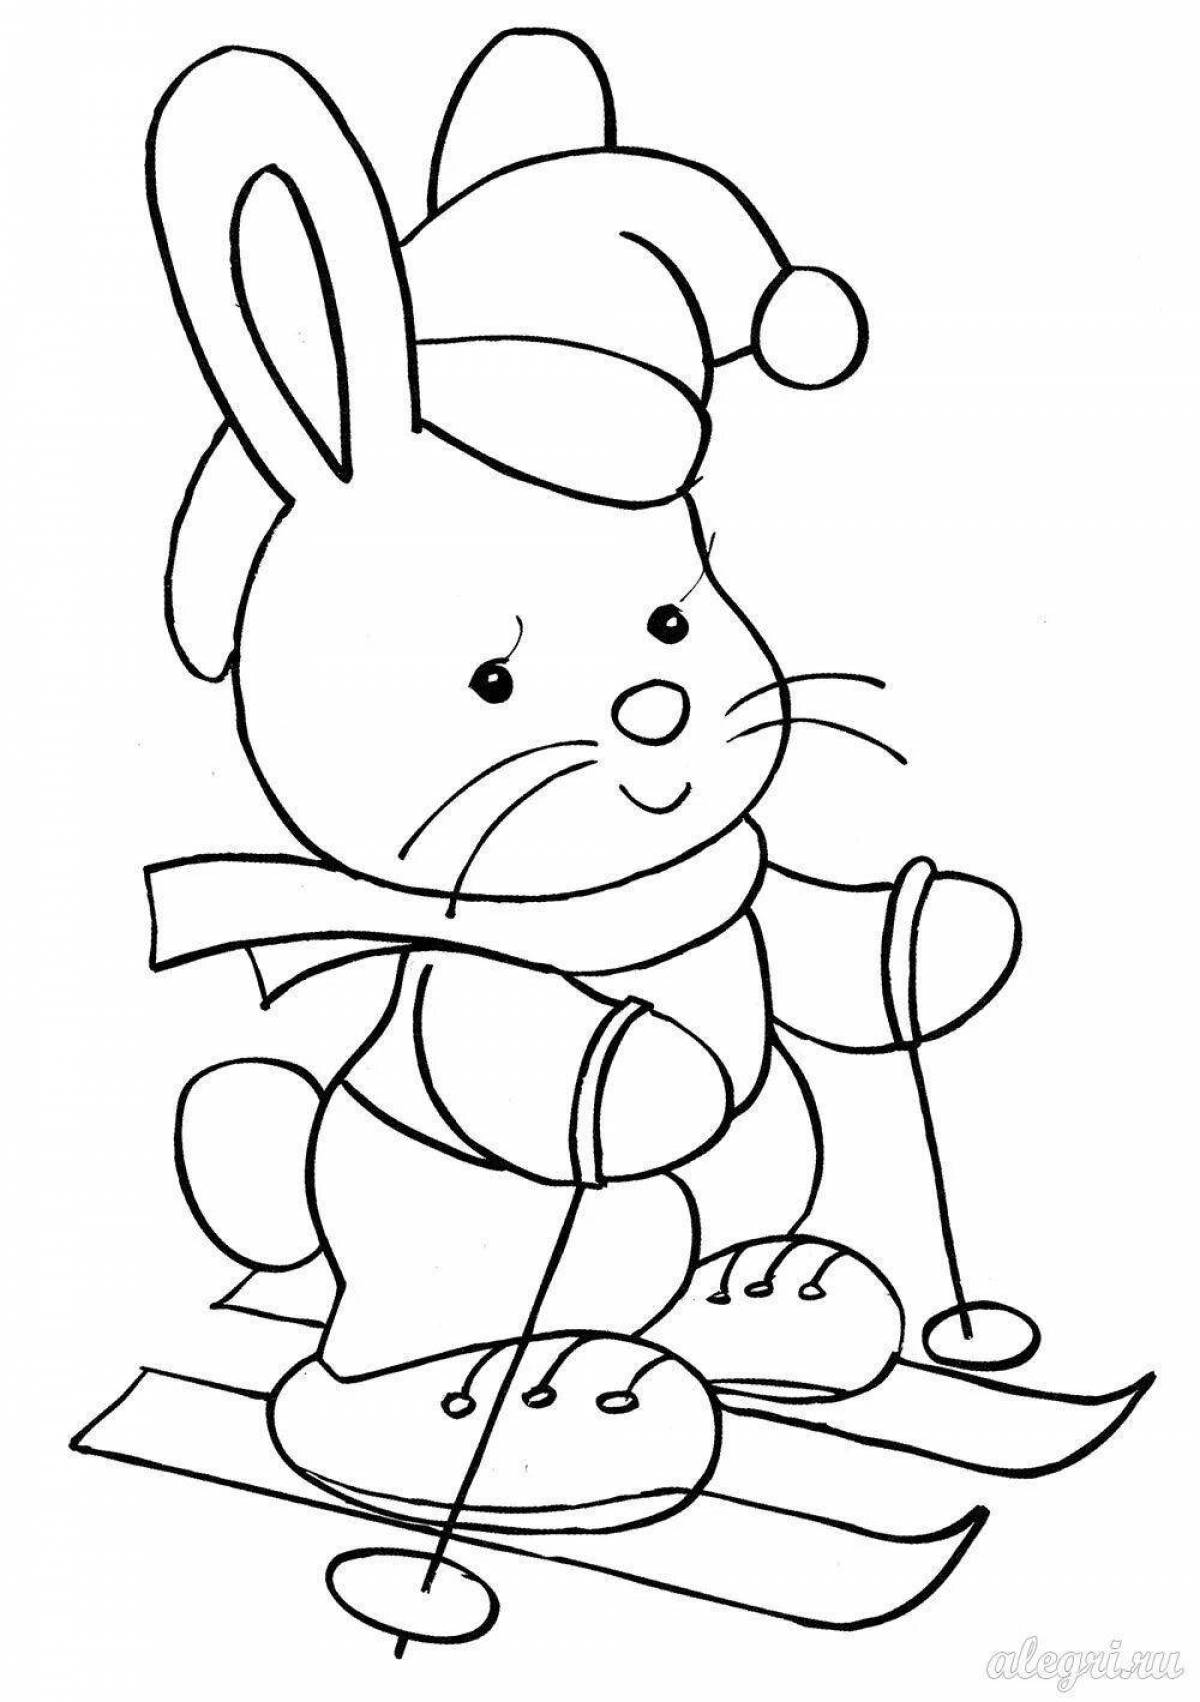 Colorful Christmas Bunny coloring book